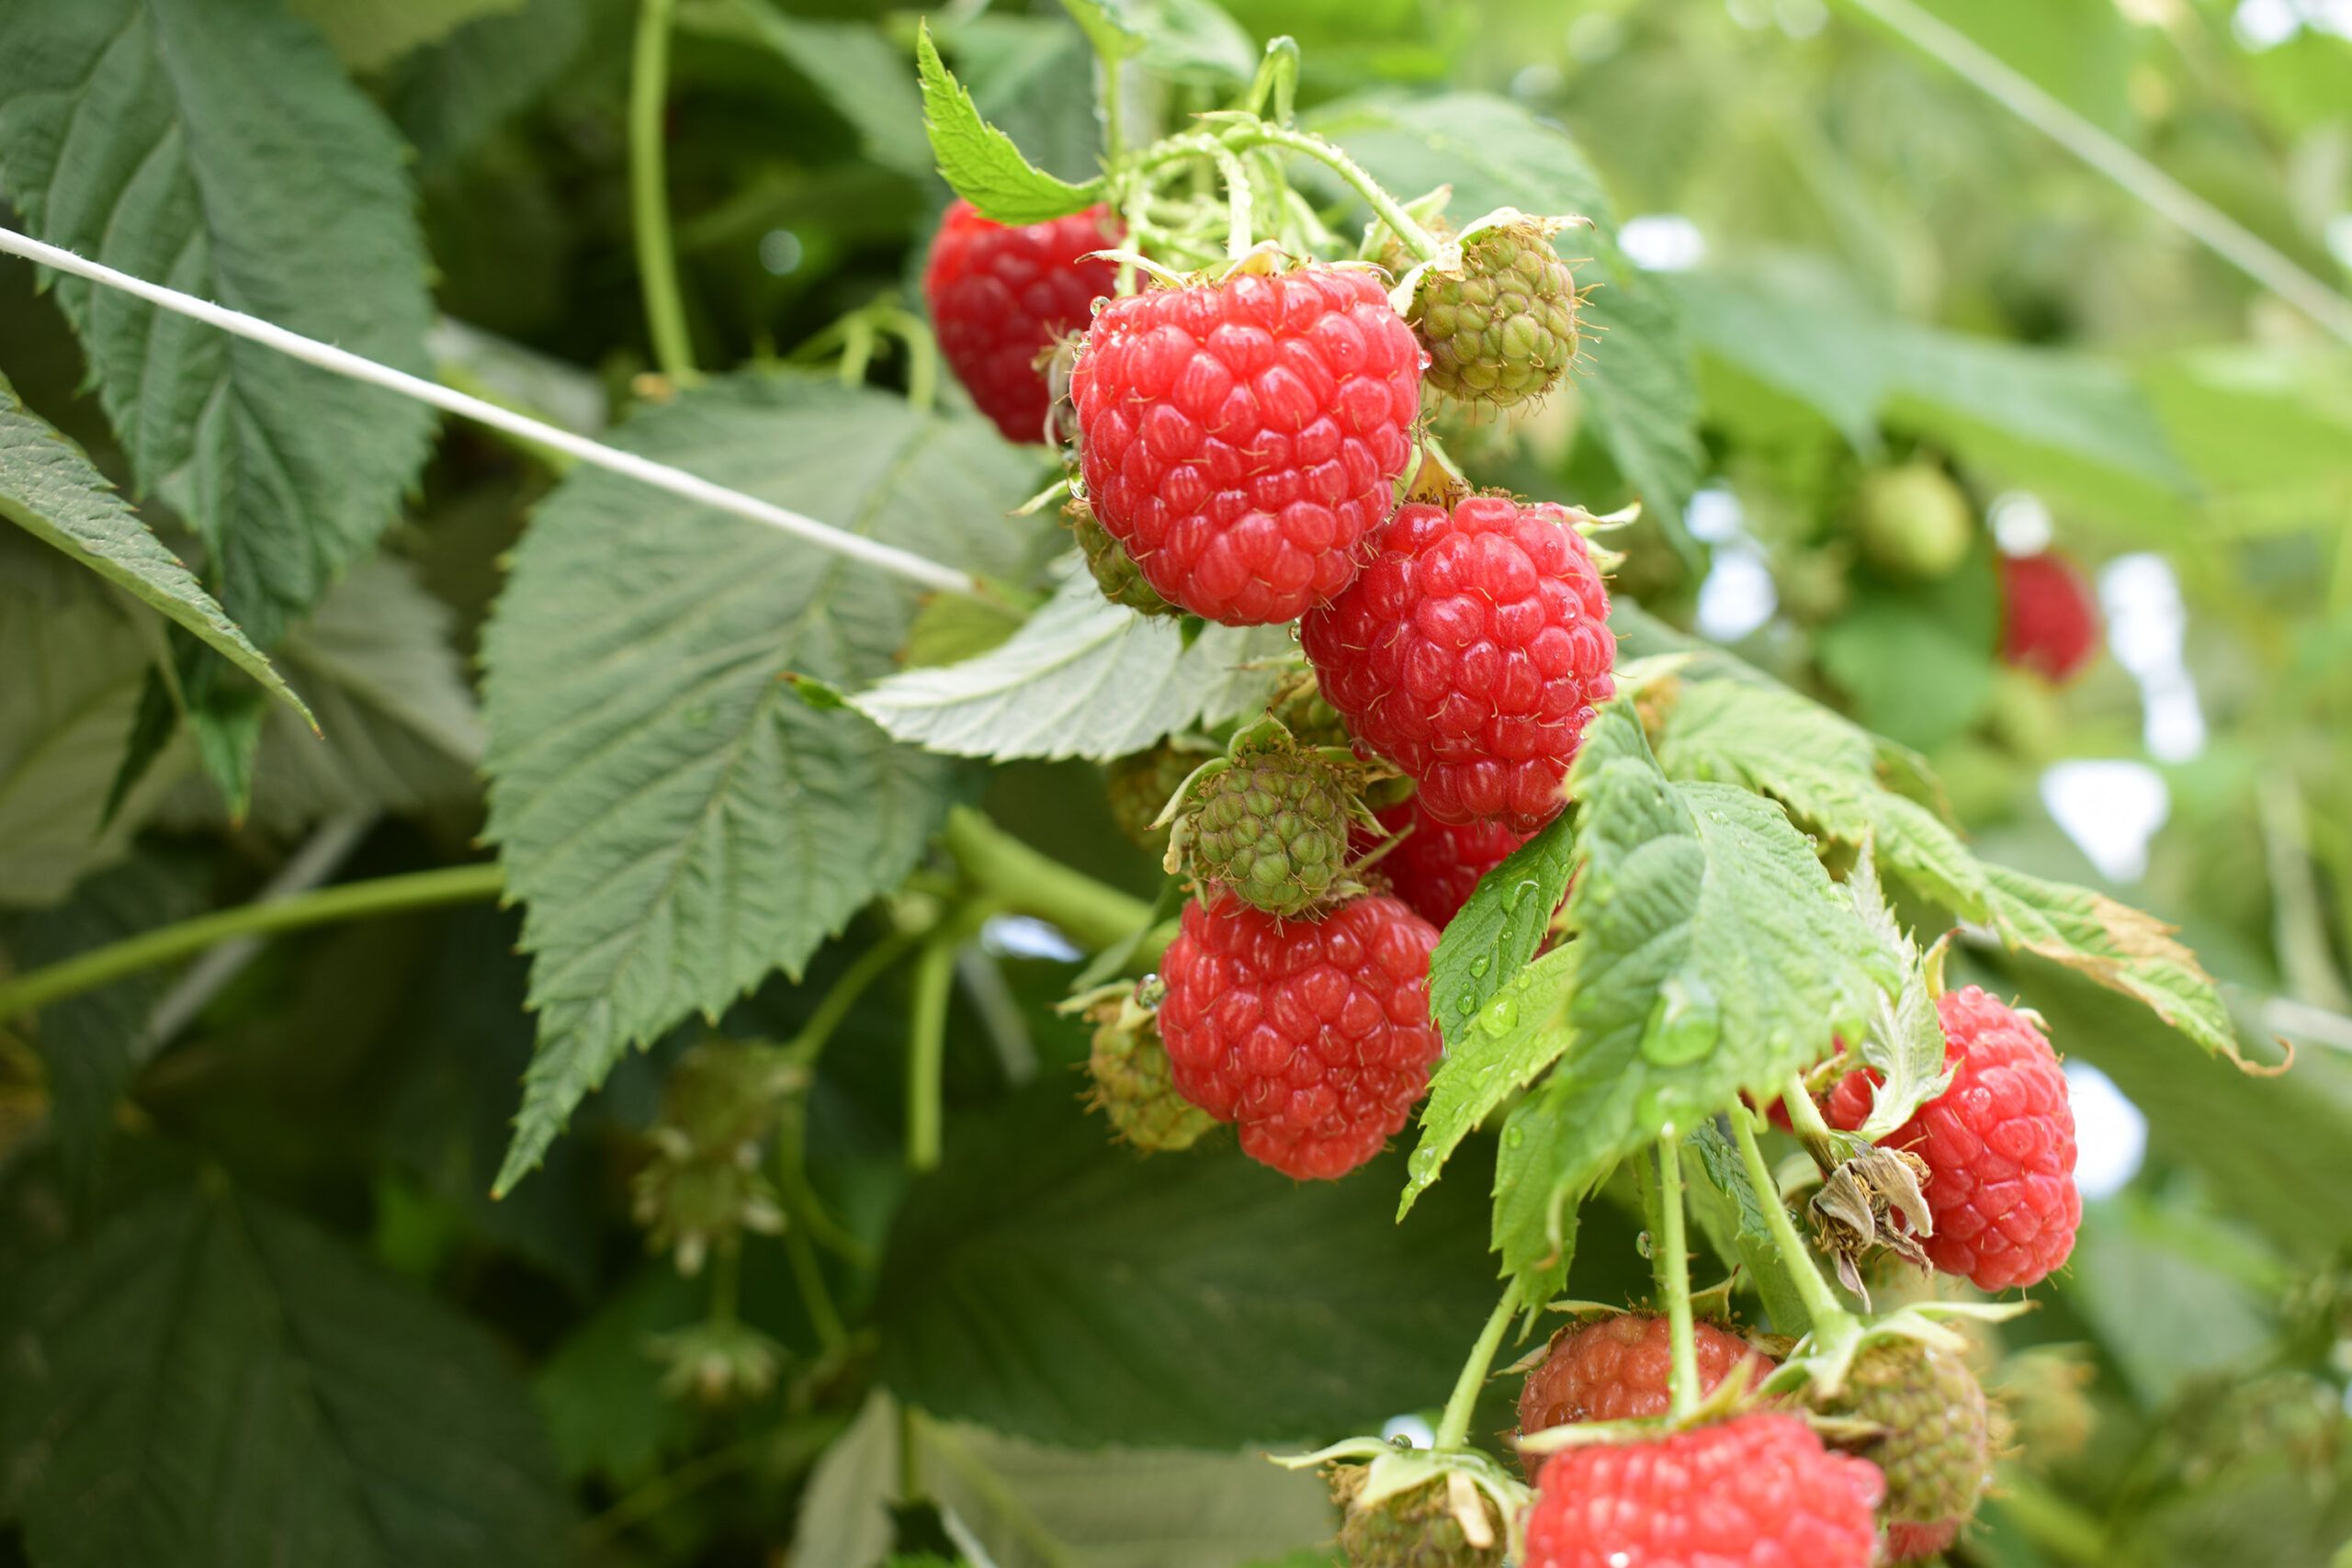 Ripe raspberries ready to be harvested